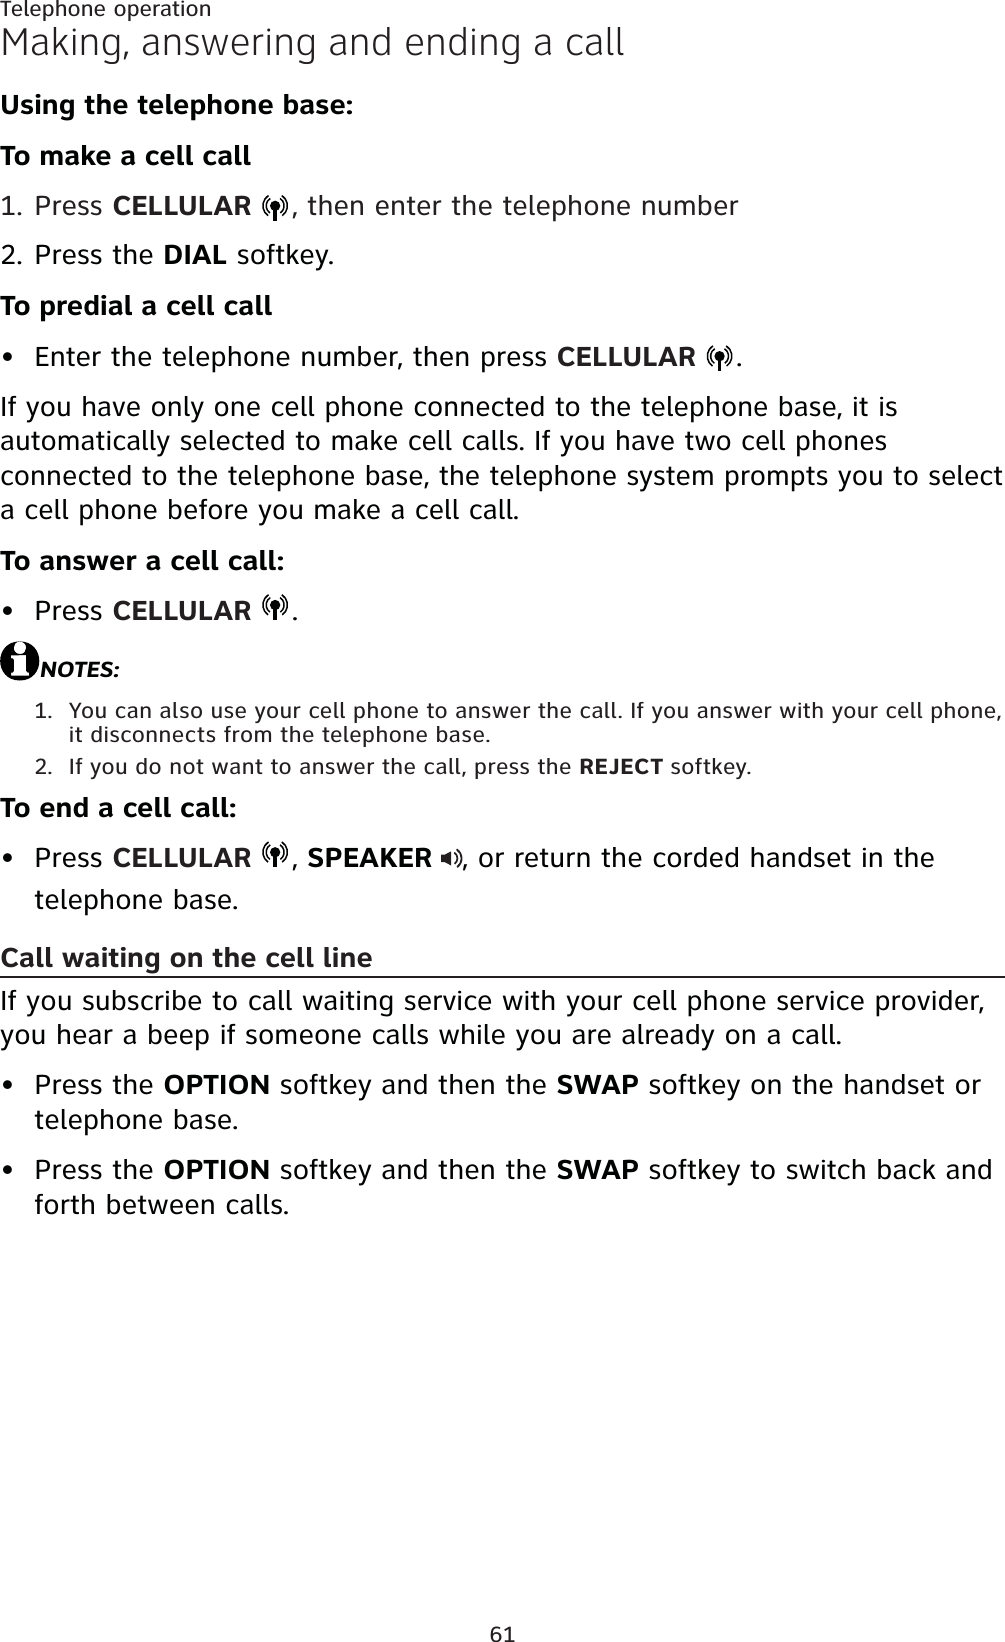 61Telephone operationMaking, answering and ending a callUsing the telephone base:To make a cell callPress CELLULAR  , then enter the telephone numberPress the DIAL softkey.To predial a cell callEnter the telephone number, then press CELLULAR  .If you have only one cell phone connected to the telephone base, it is automatically selected to make cell calls. If you have two cell phones connected to the telephone base, the telephone system prompts you to select a cell phone before you make a cell call.To answer a cell call:Press CELLULAR  .NOTES:You can also use your cell phone to answer the call. If you answer with your cell phone, it disconnects from the telephone base.If you do not want to answer the call, press the REJECT softkey.To end a cell call:Press CELLULAR  ,SPEAKER , or return the corded handset in the telephone base.Call waiting on the cell lineIf you subscribe to call waiting service with your cell phone service provider, you hear a beep if someone calls while you are already on a call.Press the OPTION softkey and then the SWAP softkey on the handset or telephone base.Press the OPTION softkey and then the SWAP softkey to switch back and forth between calls.1.2.••1.2.•••